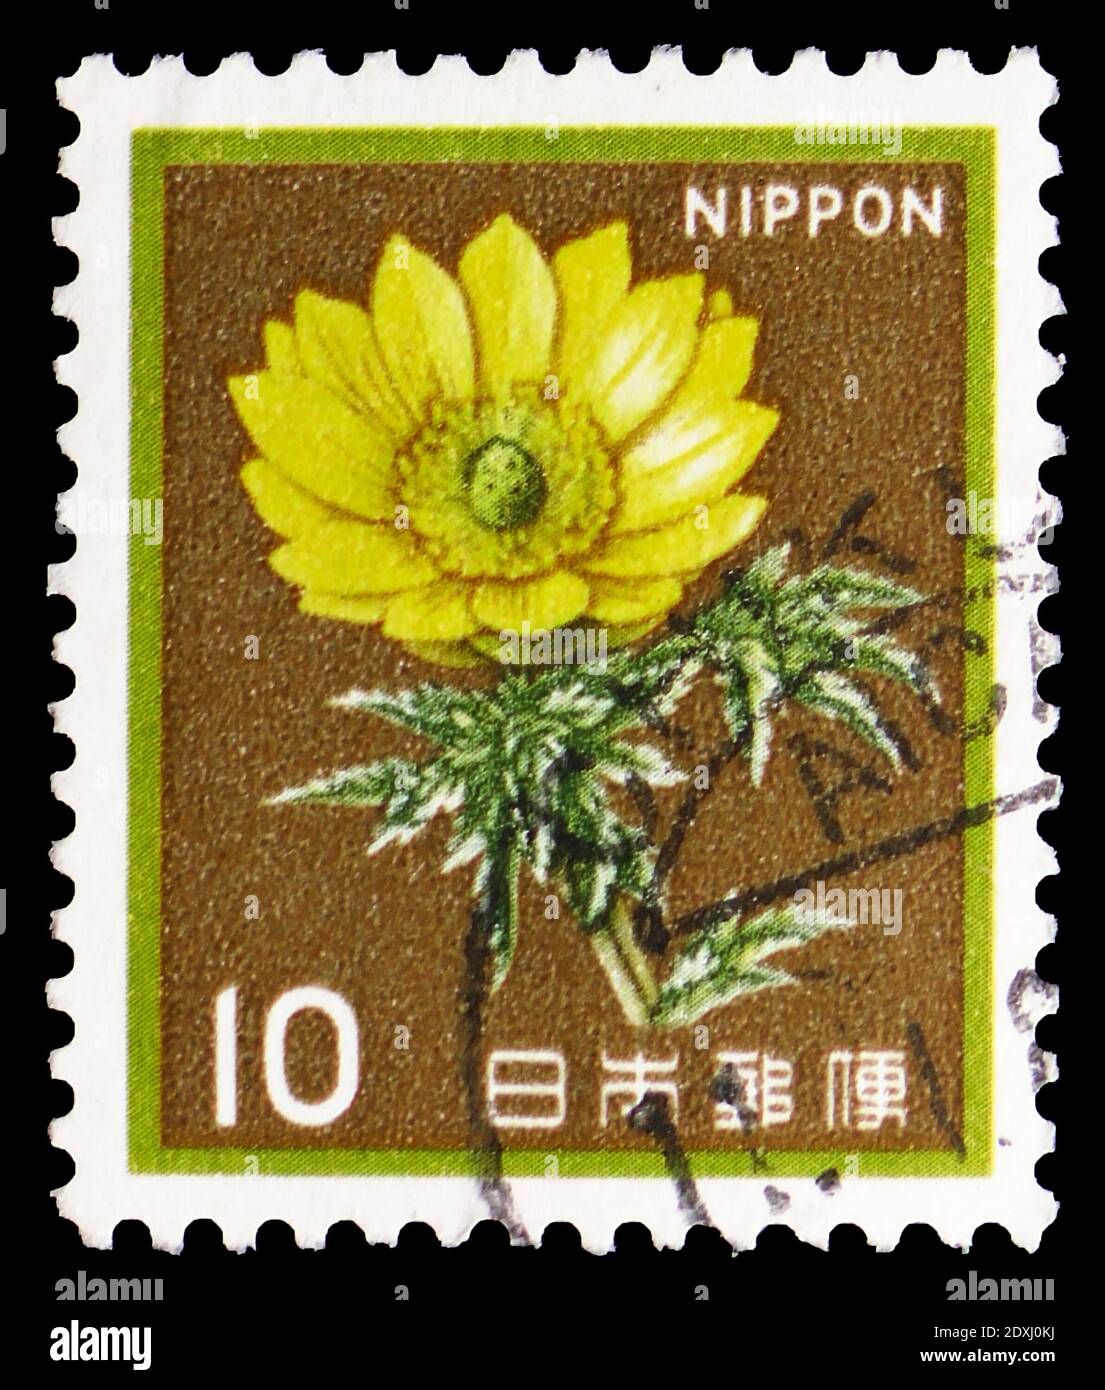 MOSCOW, RUSSIA - MARCH 23, 2019: Postage stamp printed in Japan shows Adonis (Adonis Amurensis), Fauna, Flora and Cultural Heritage serie, circa 1982 Stock Photo